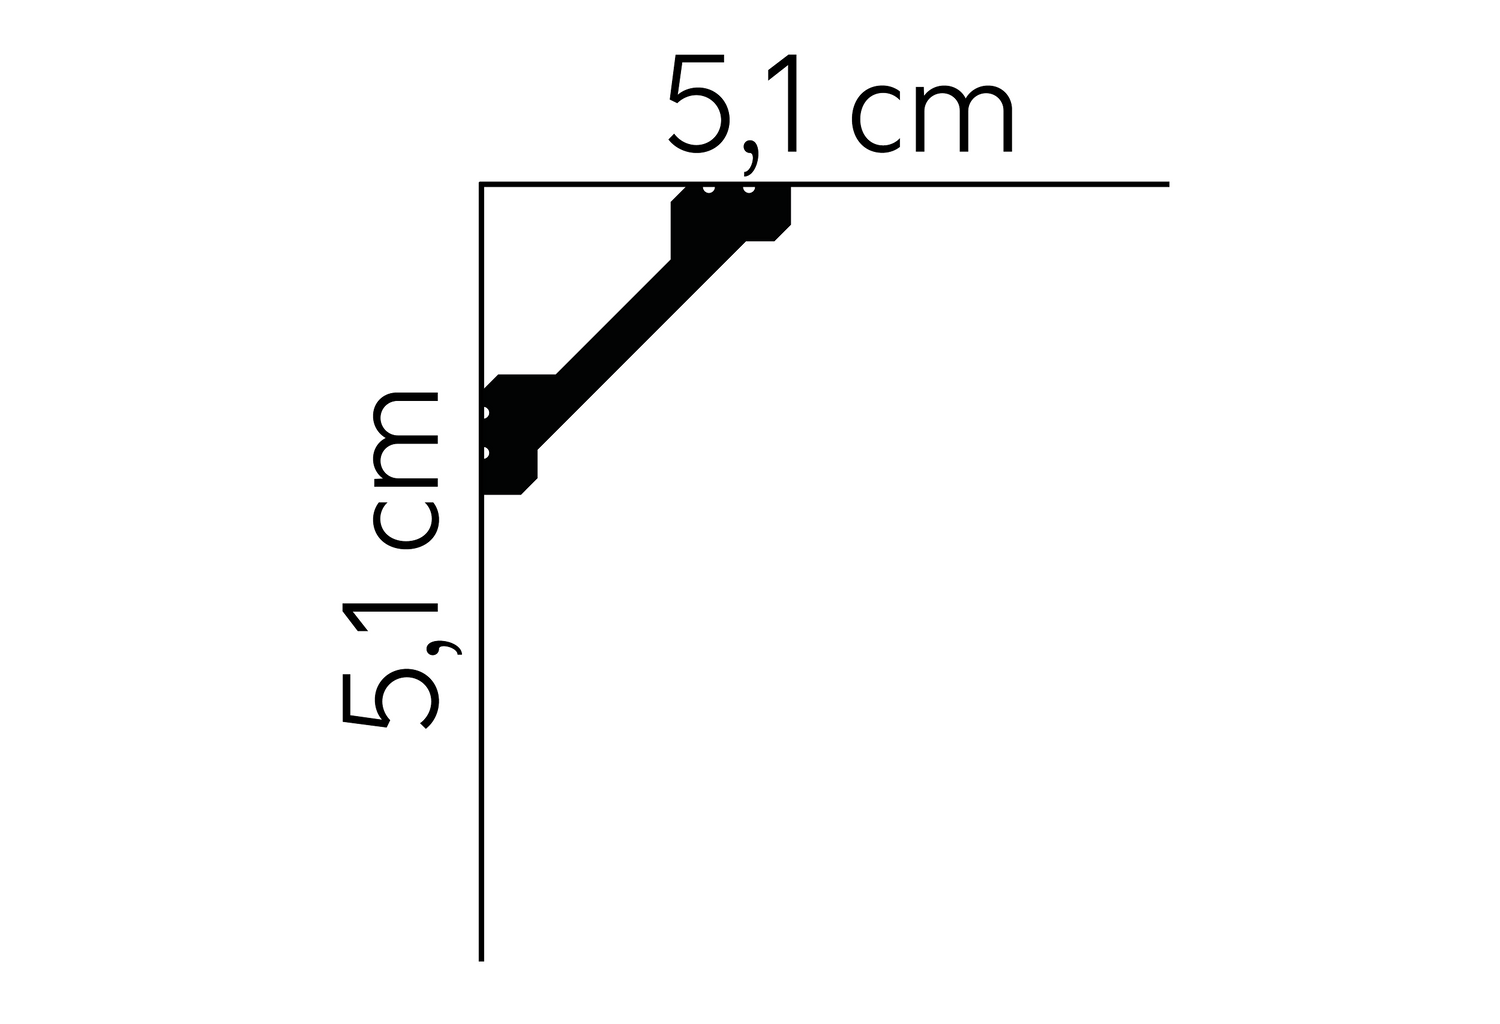 MD368 - Lightweight Coving graphic showing its 5.1cm height and width